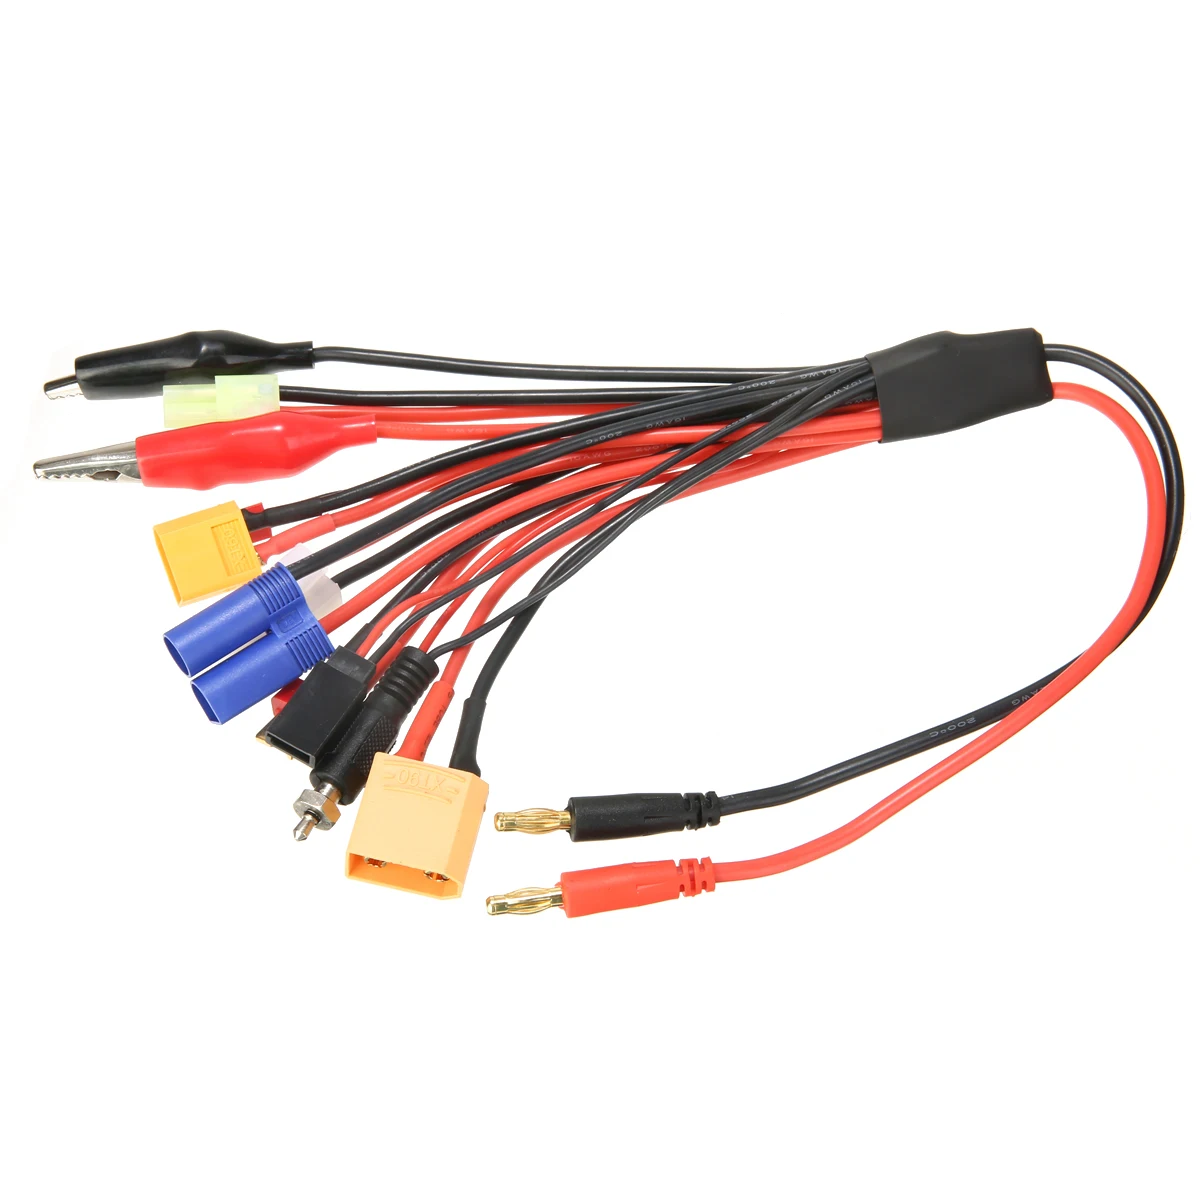 1 Set 10 in 1 Lipo Battery Charge Cable Multifunction Convert Charge Wire  Lead For RC Airplane Car Hot Sales RC Accessories|Parts & Accessories| -  AliExpress